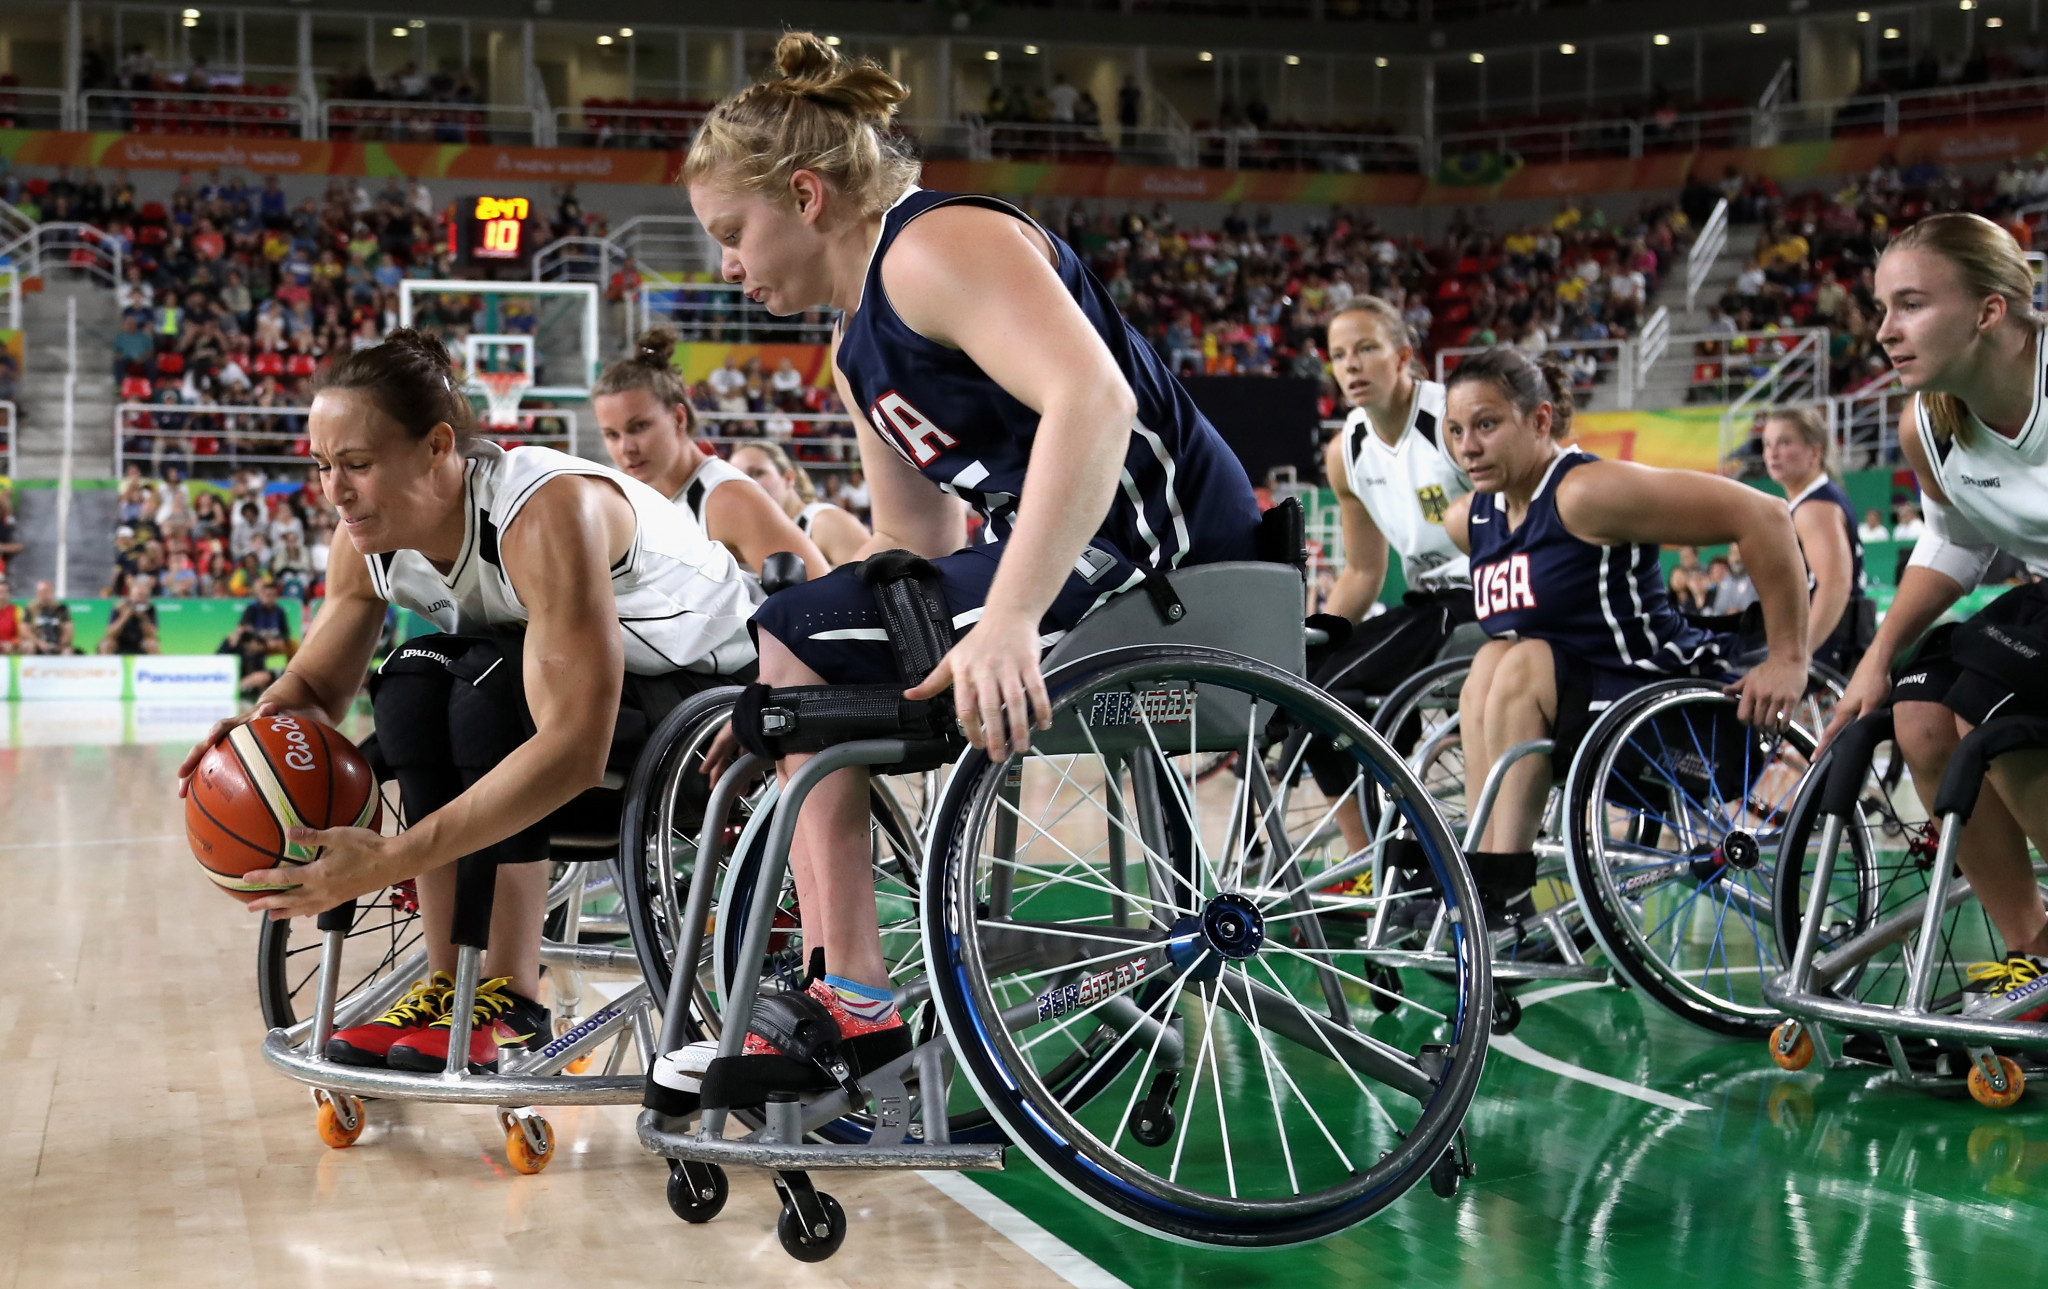 United States announce women's team for Wheelchair Basketball World Championships